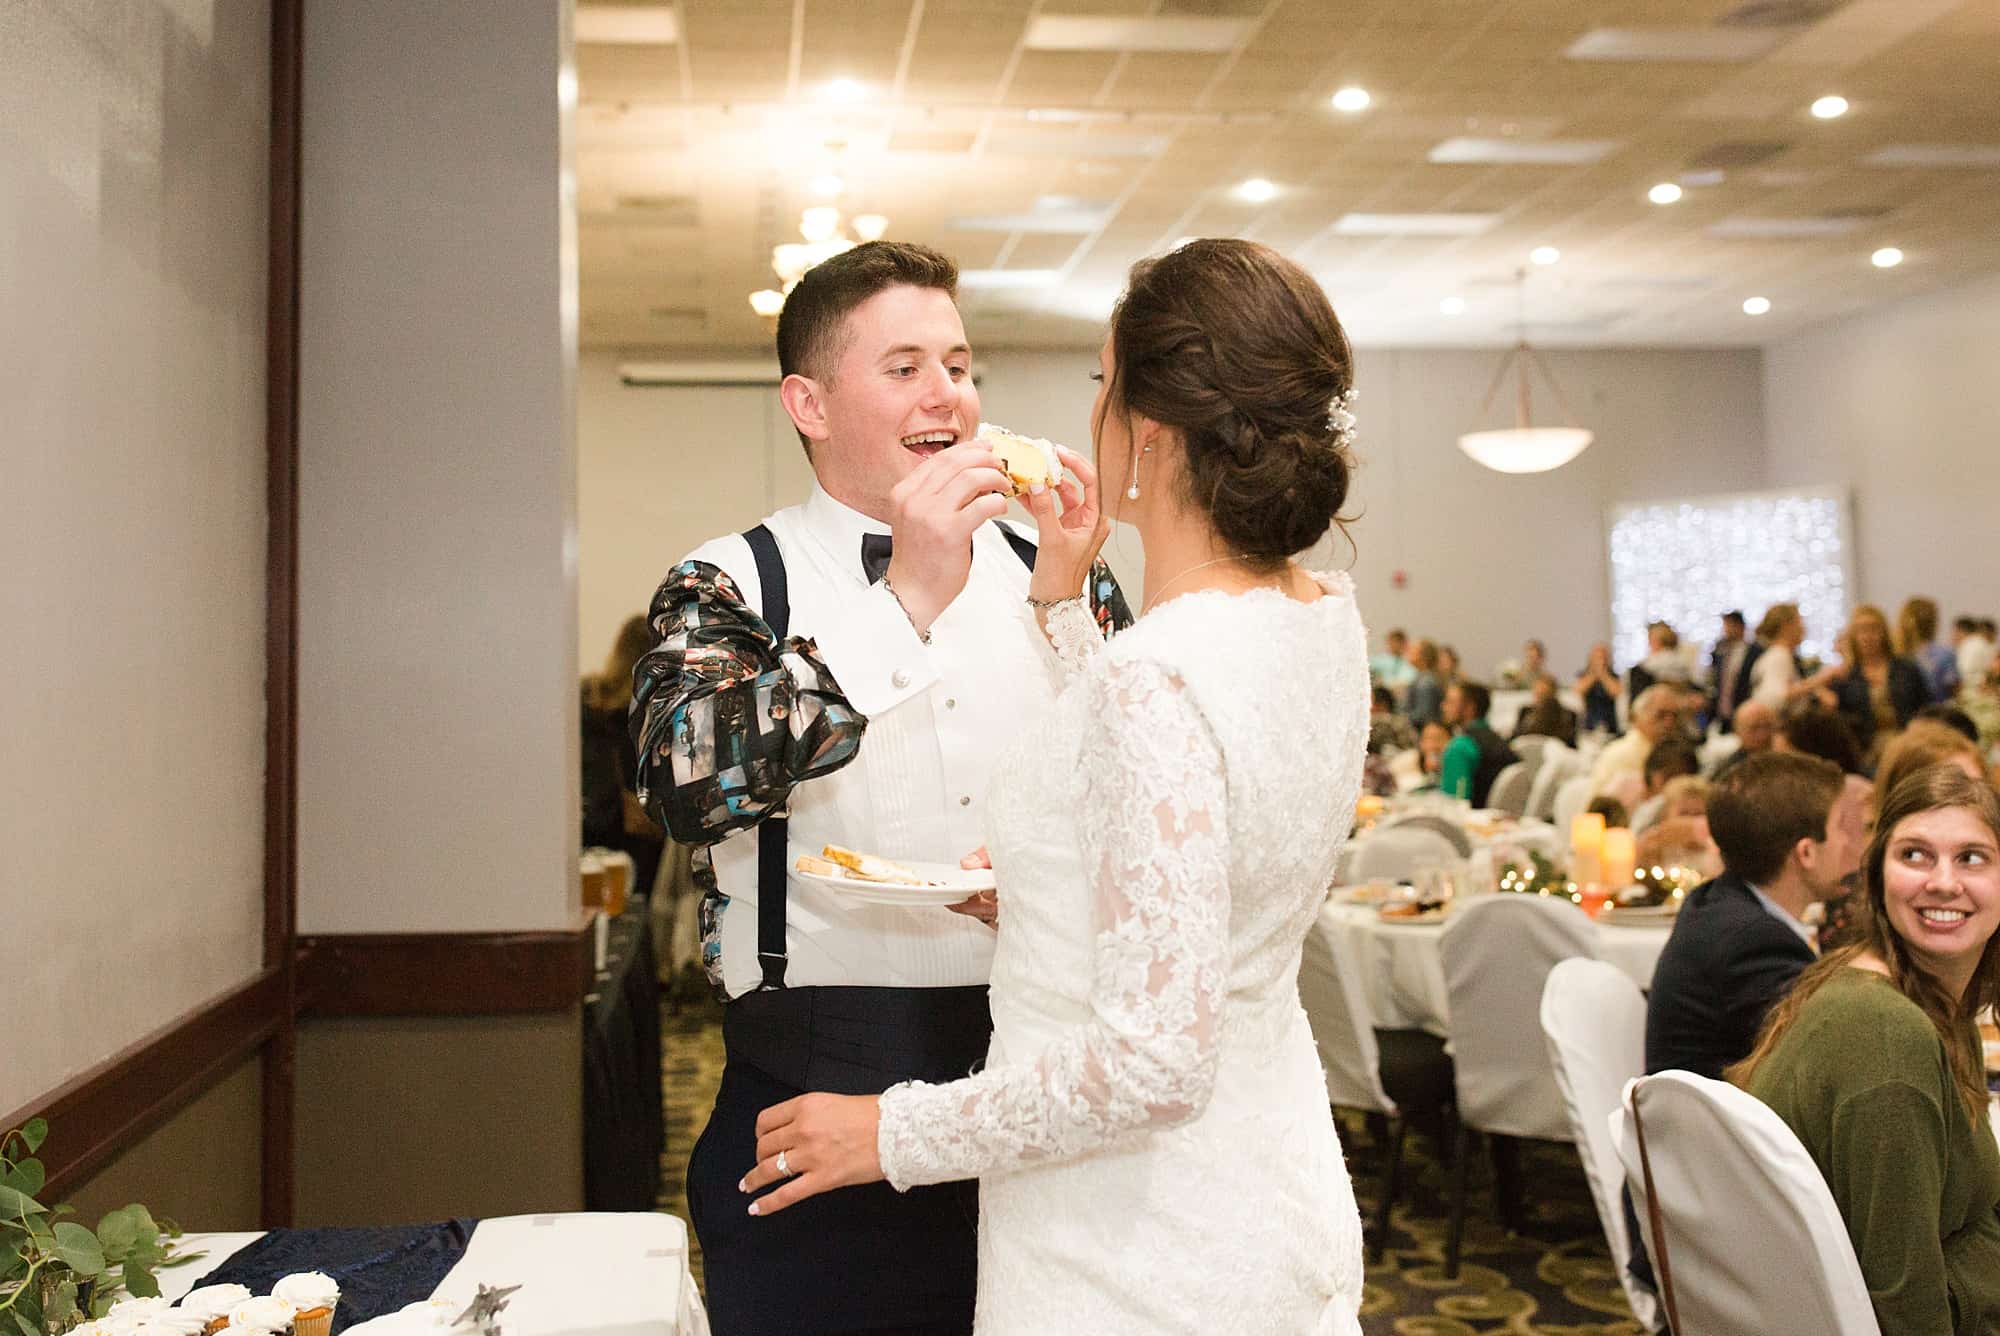 A groom wears a party shirt after his outfit change for his wedding reception